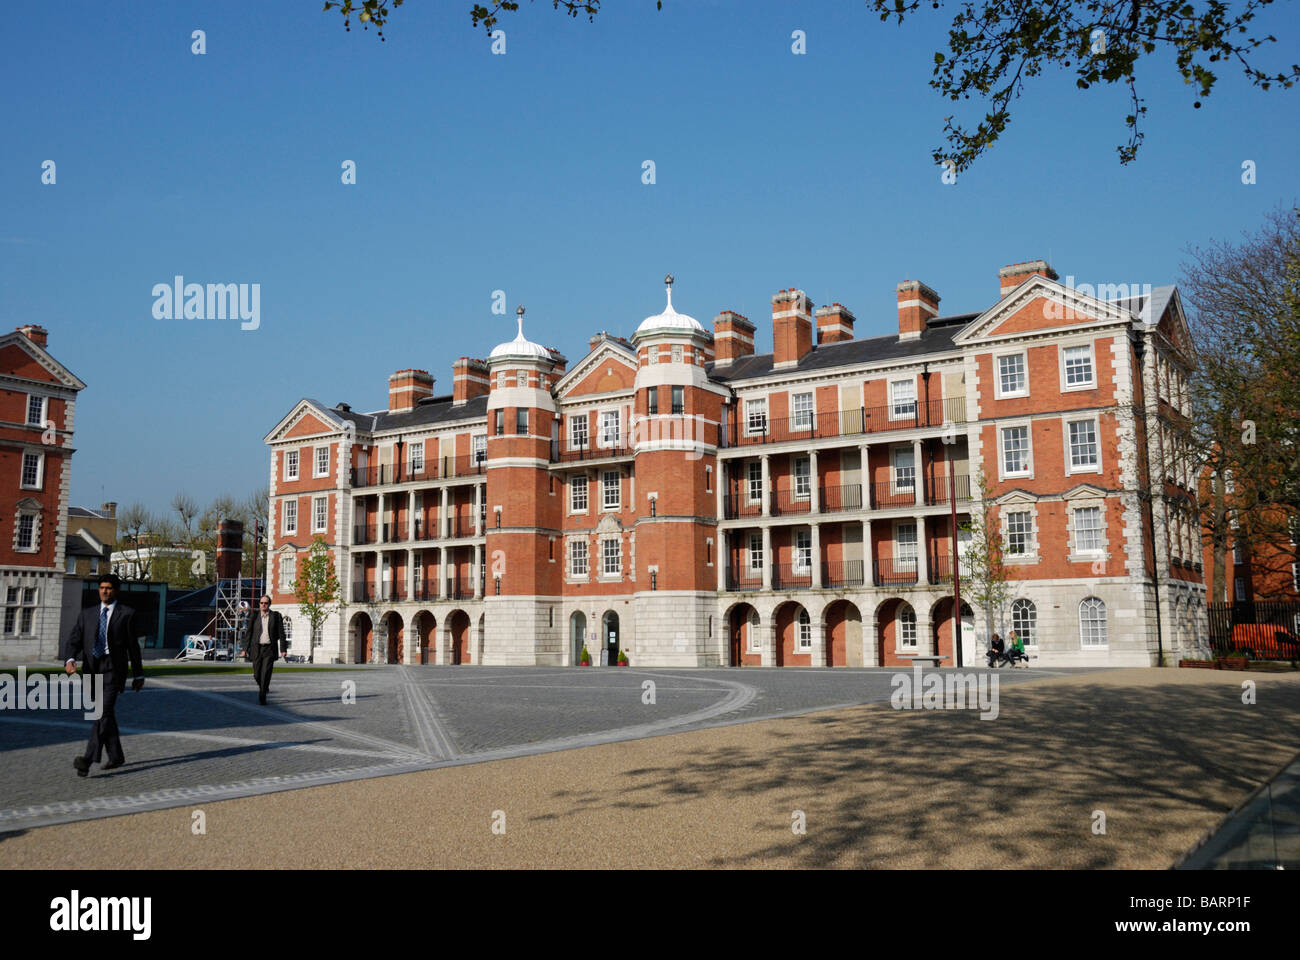 University of the Arts London Chelsea College of Art and Design de Londres Westminster Pimlico Banque D'Images